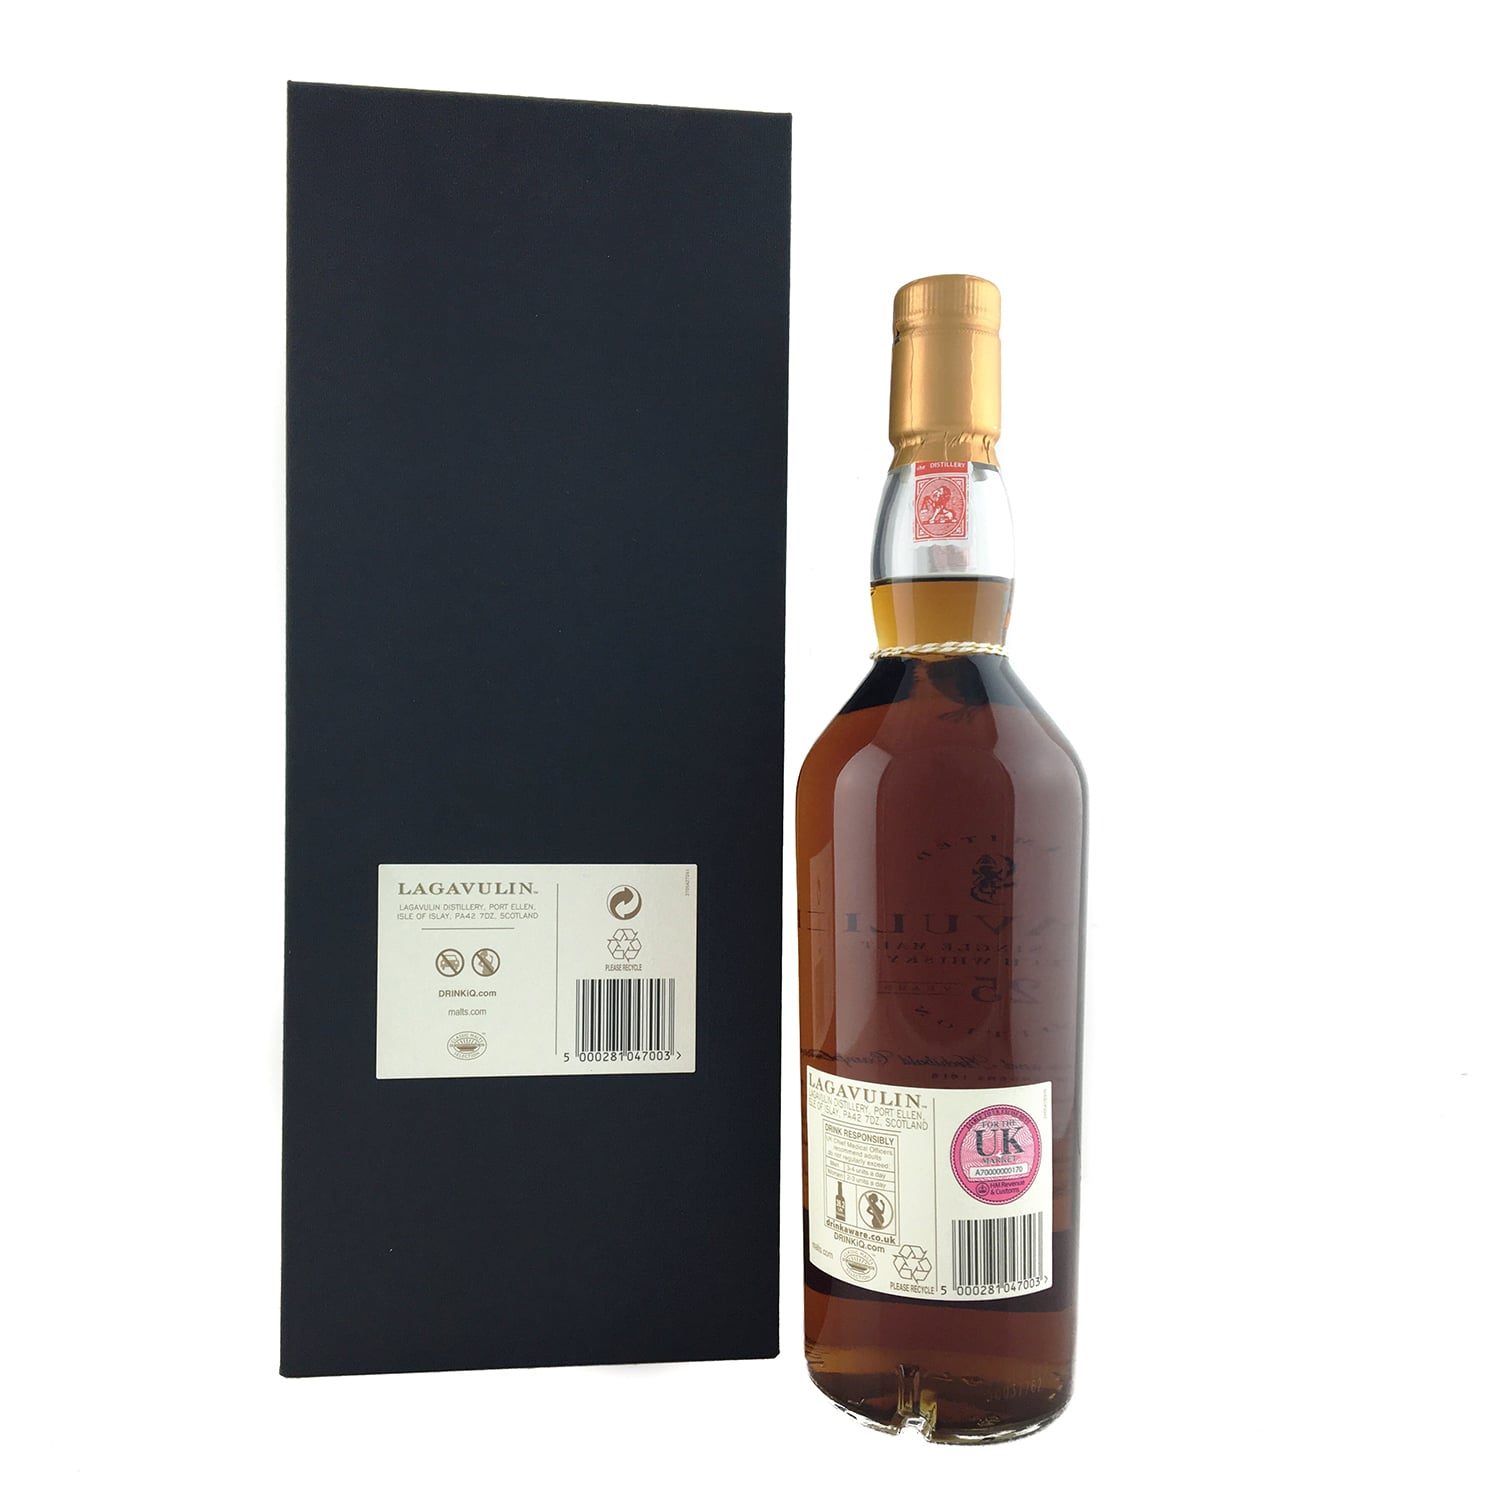 Lagavulin 25 Year Old 200th Anniversary 70cl 51.7% | The Old